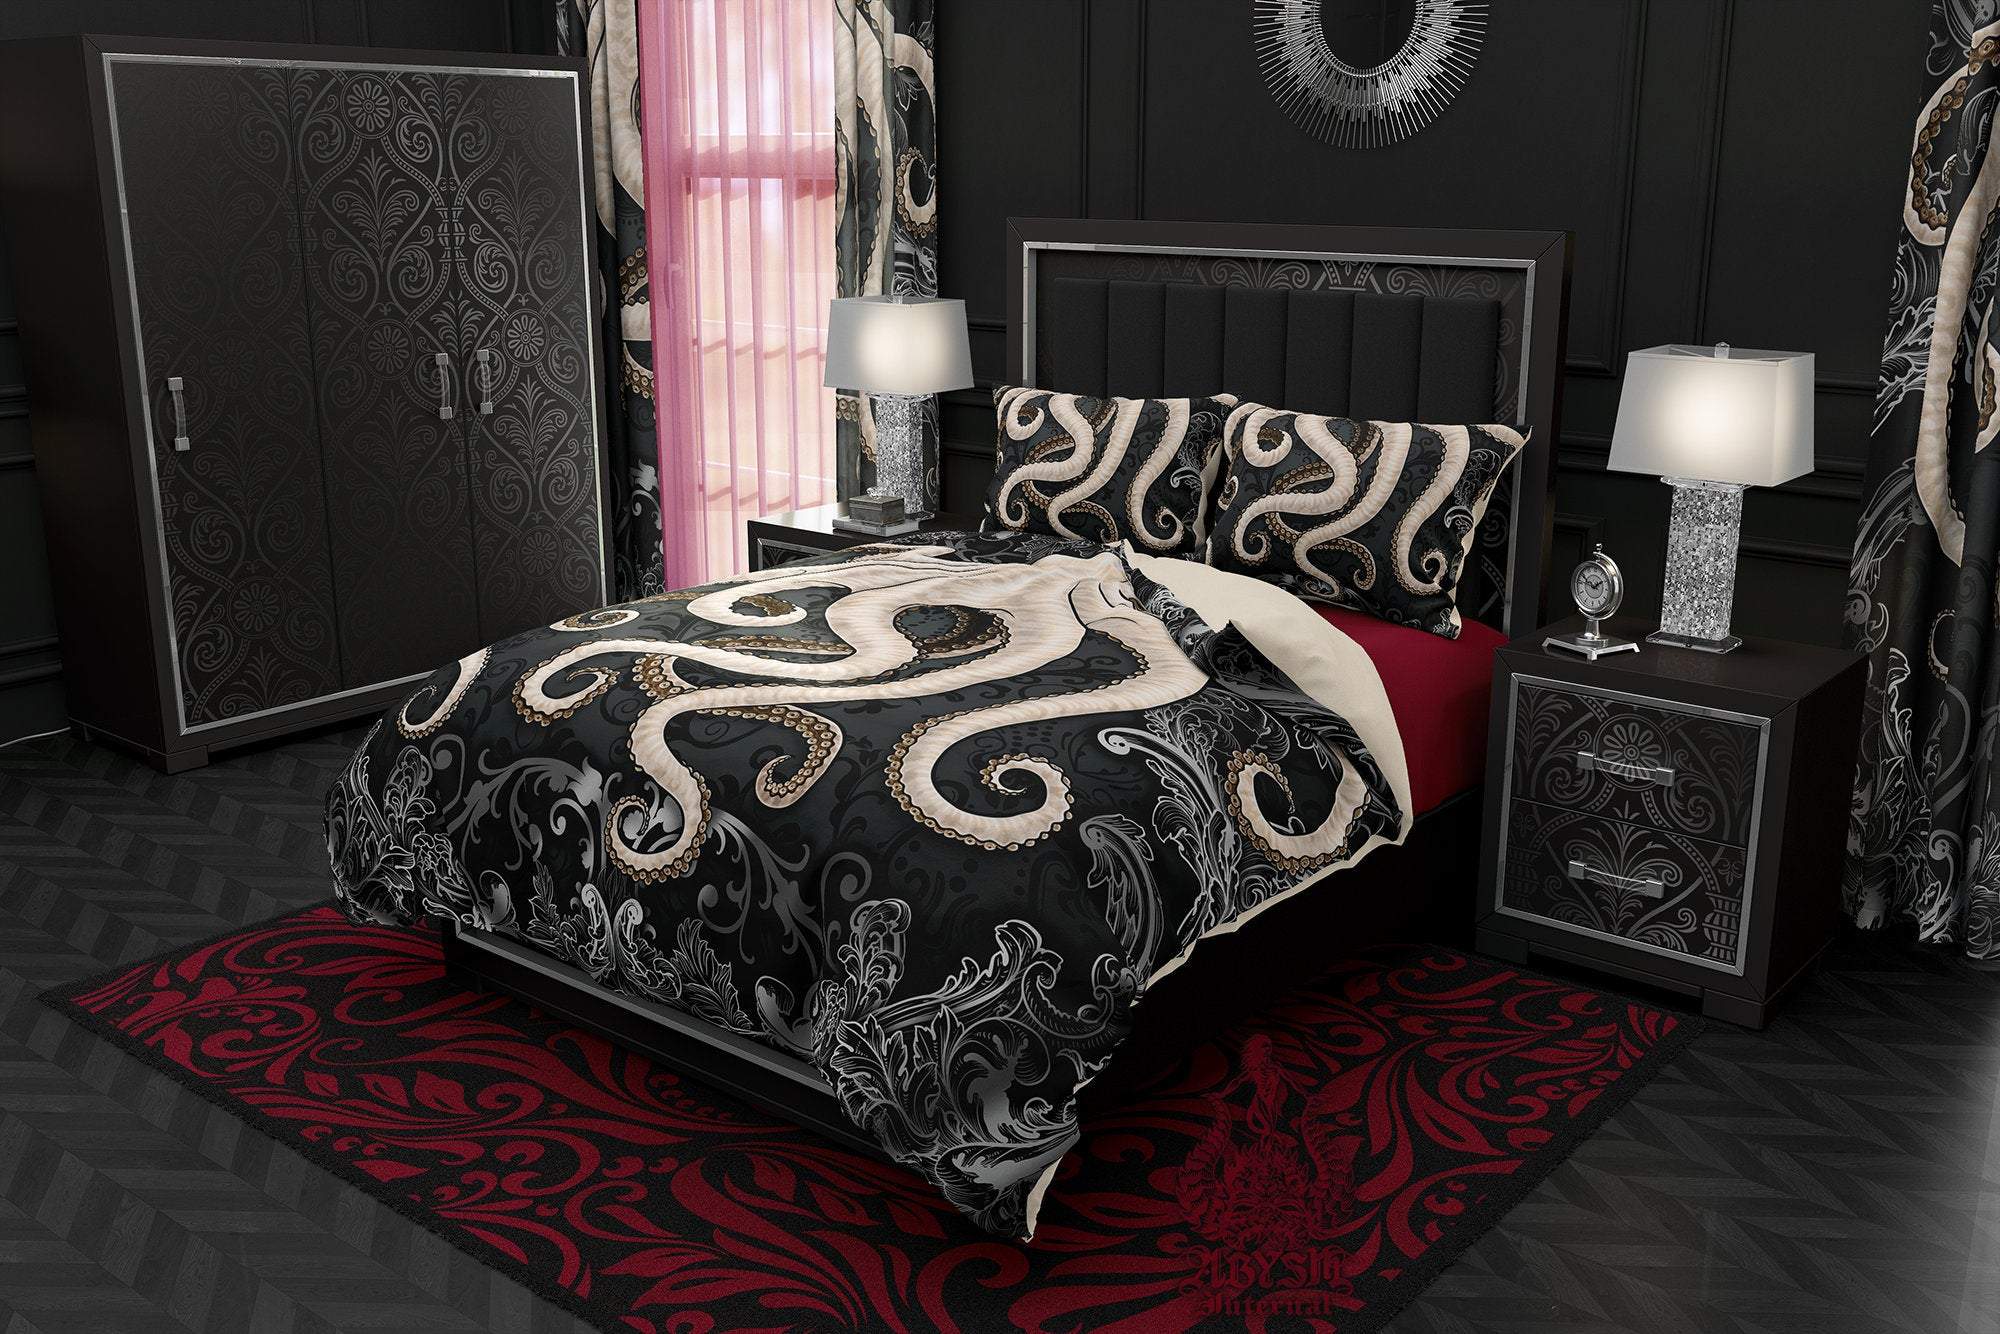 Octopus Bedding Set, Comforter and Duvet, Goth Bed Cover, Coastal Bedroom Decor, King, Queen and Twin Size - Tentacles, Dark, Black and White, - Abysm Internal